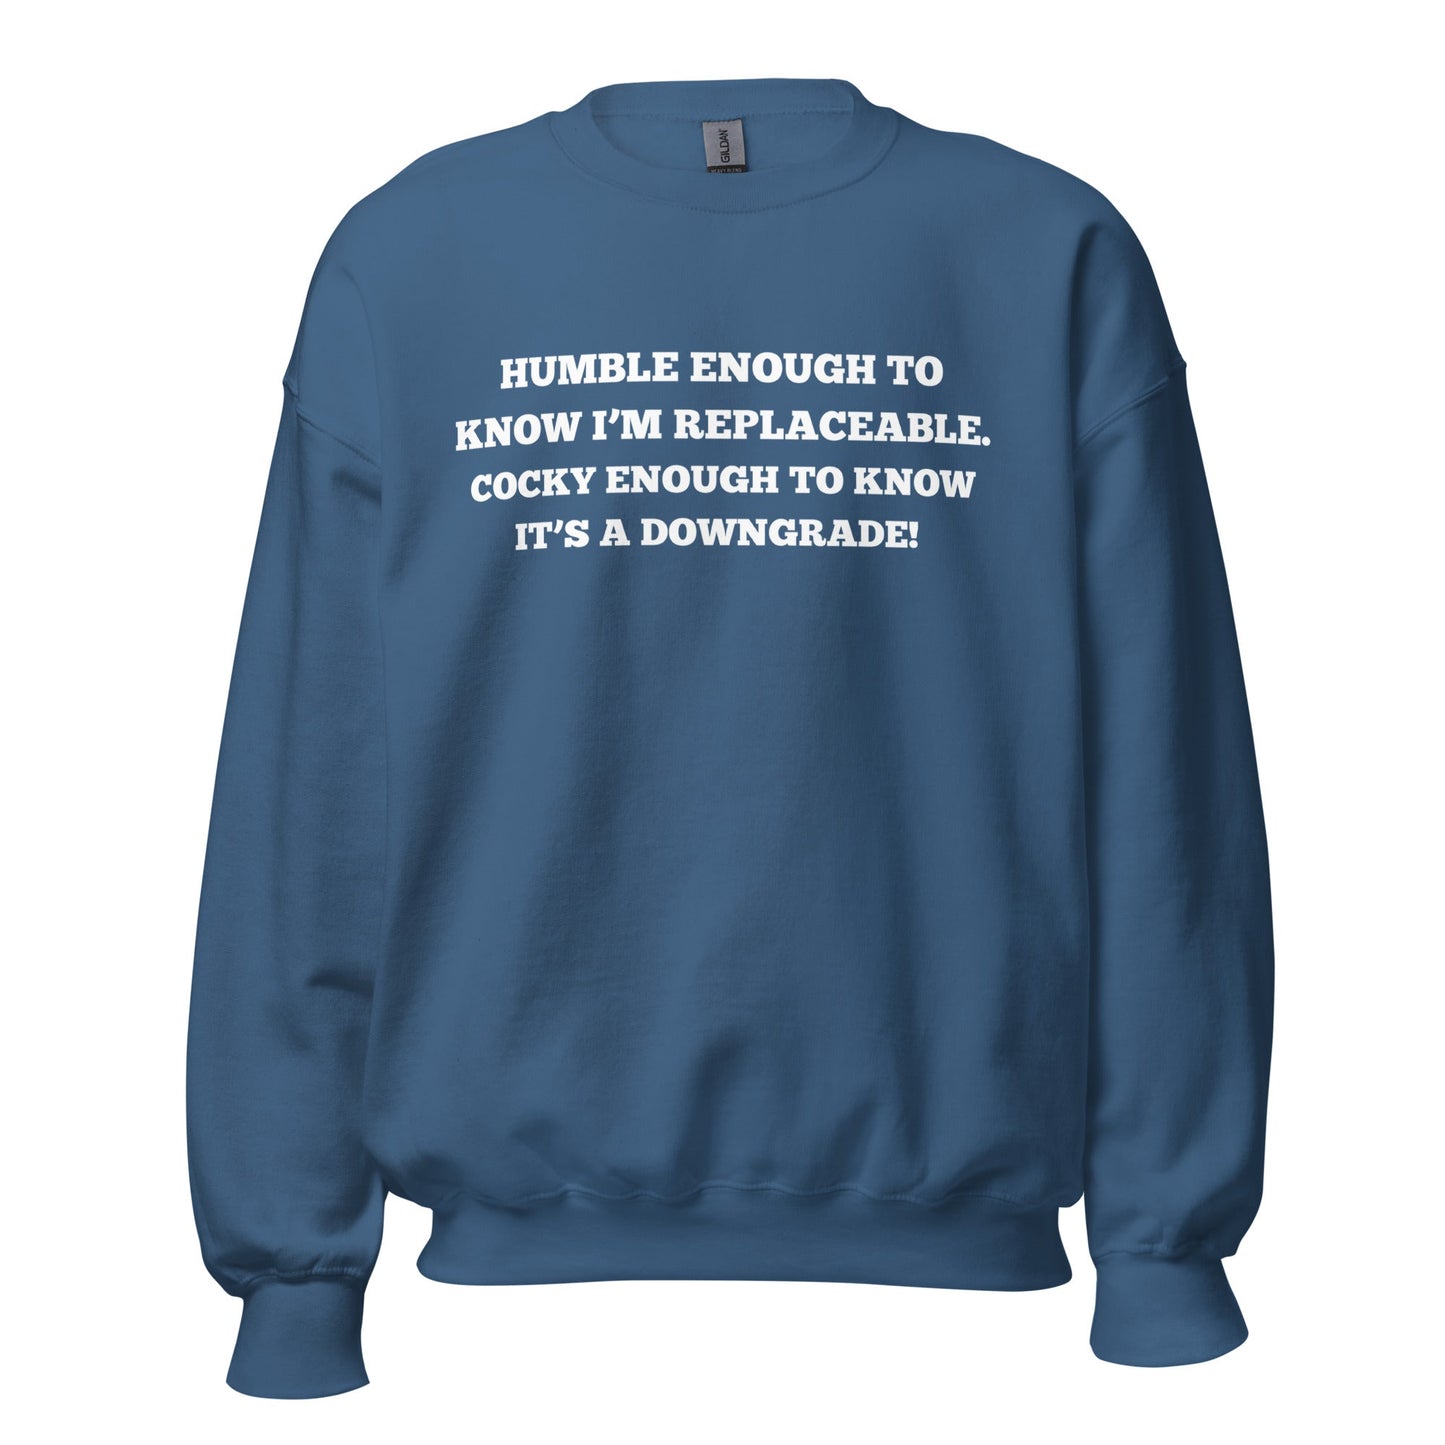 Humble Enough To Know Unisex Sweatshirt - Catch This Tea Shirt